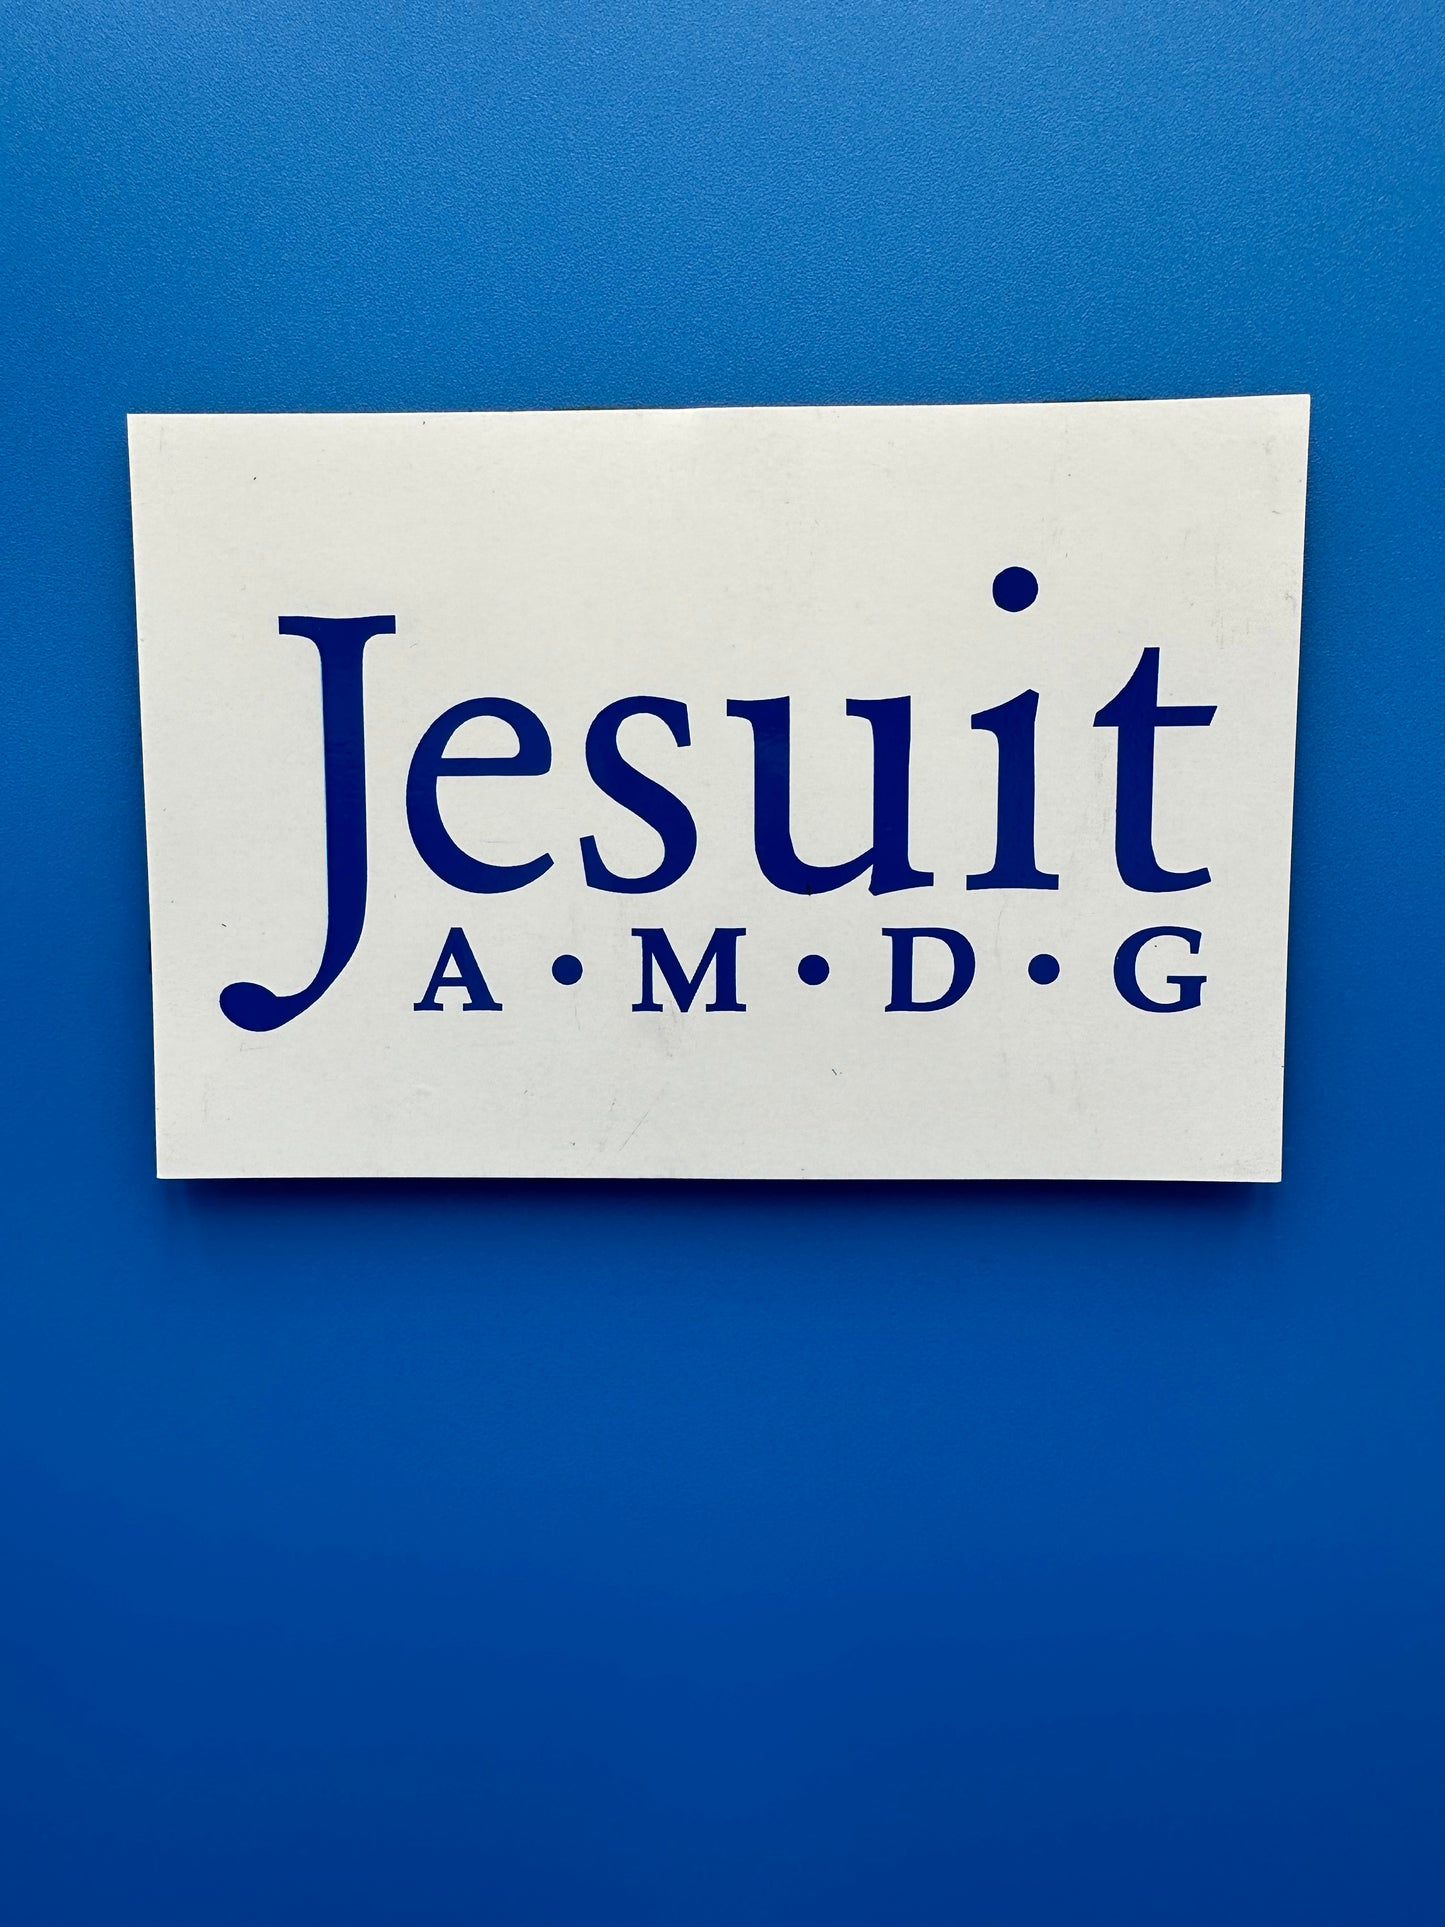 4 x 5 White magnet w/Jesuit AMDG logo.  Show your Jesuit spirit on your car or on your refrigerator!